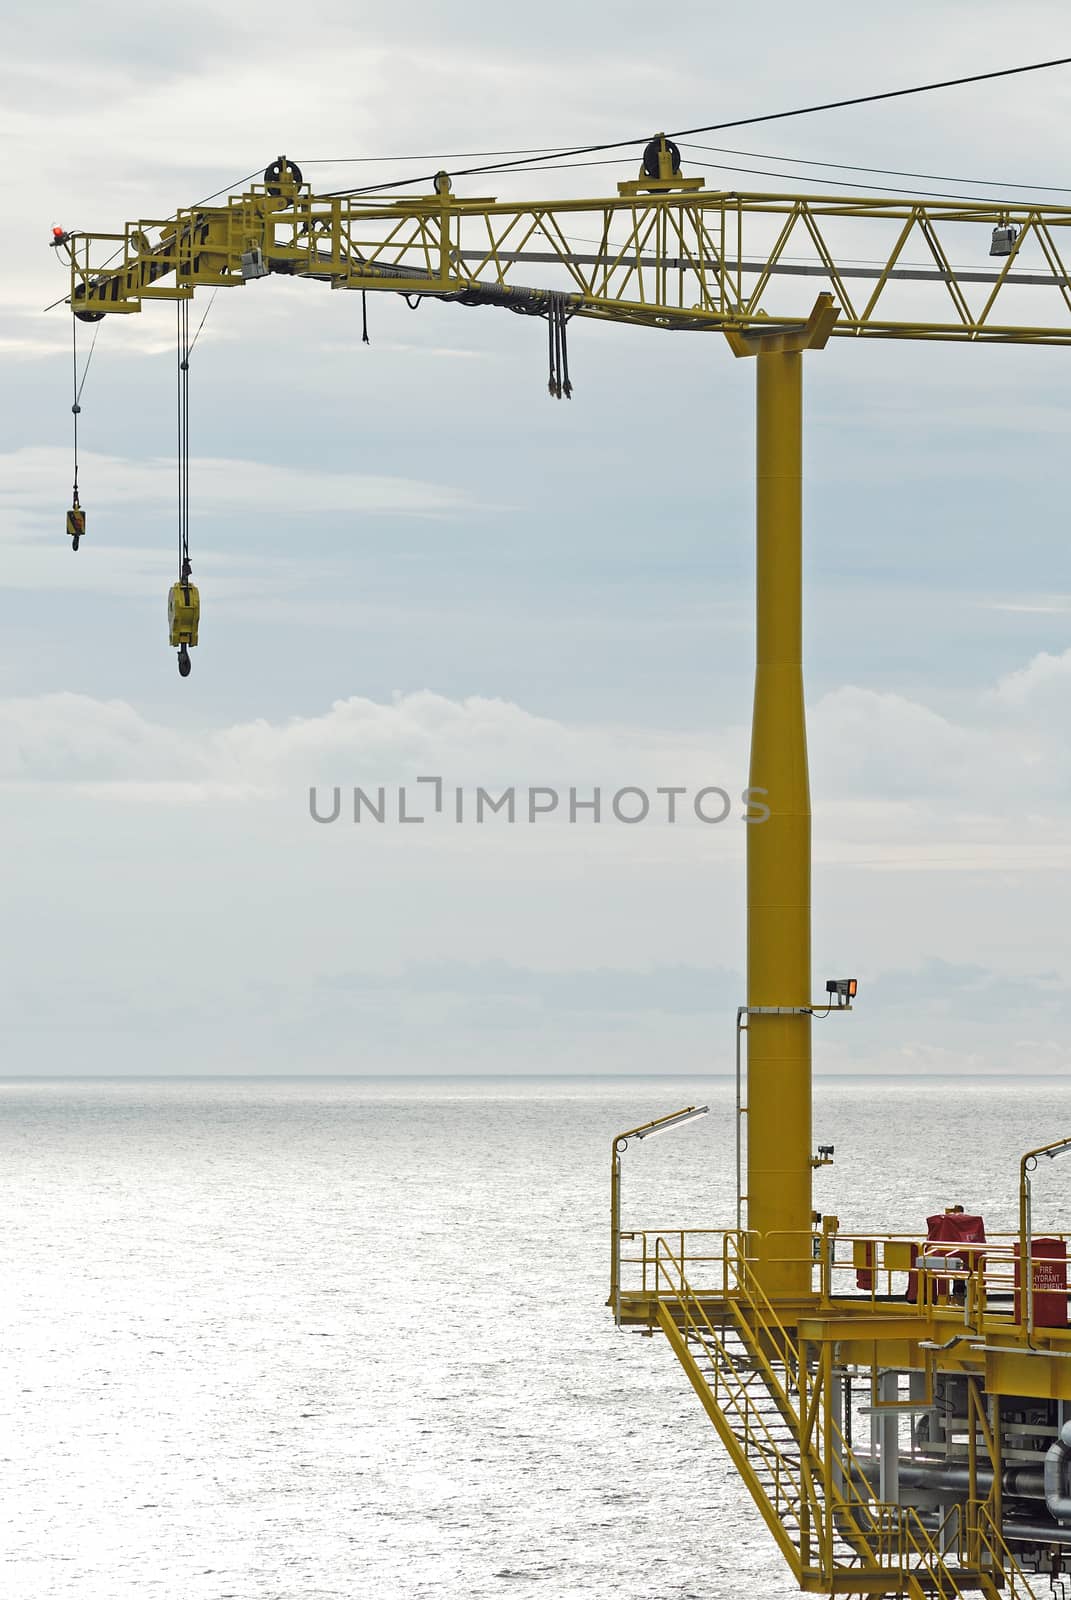 An offshore production platform in a Gulf of Thailand by think4photop